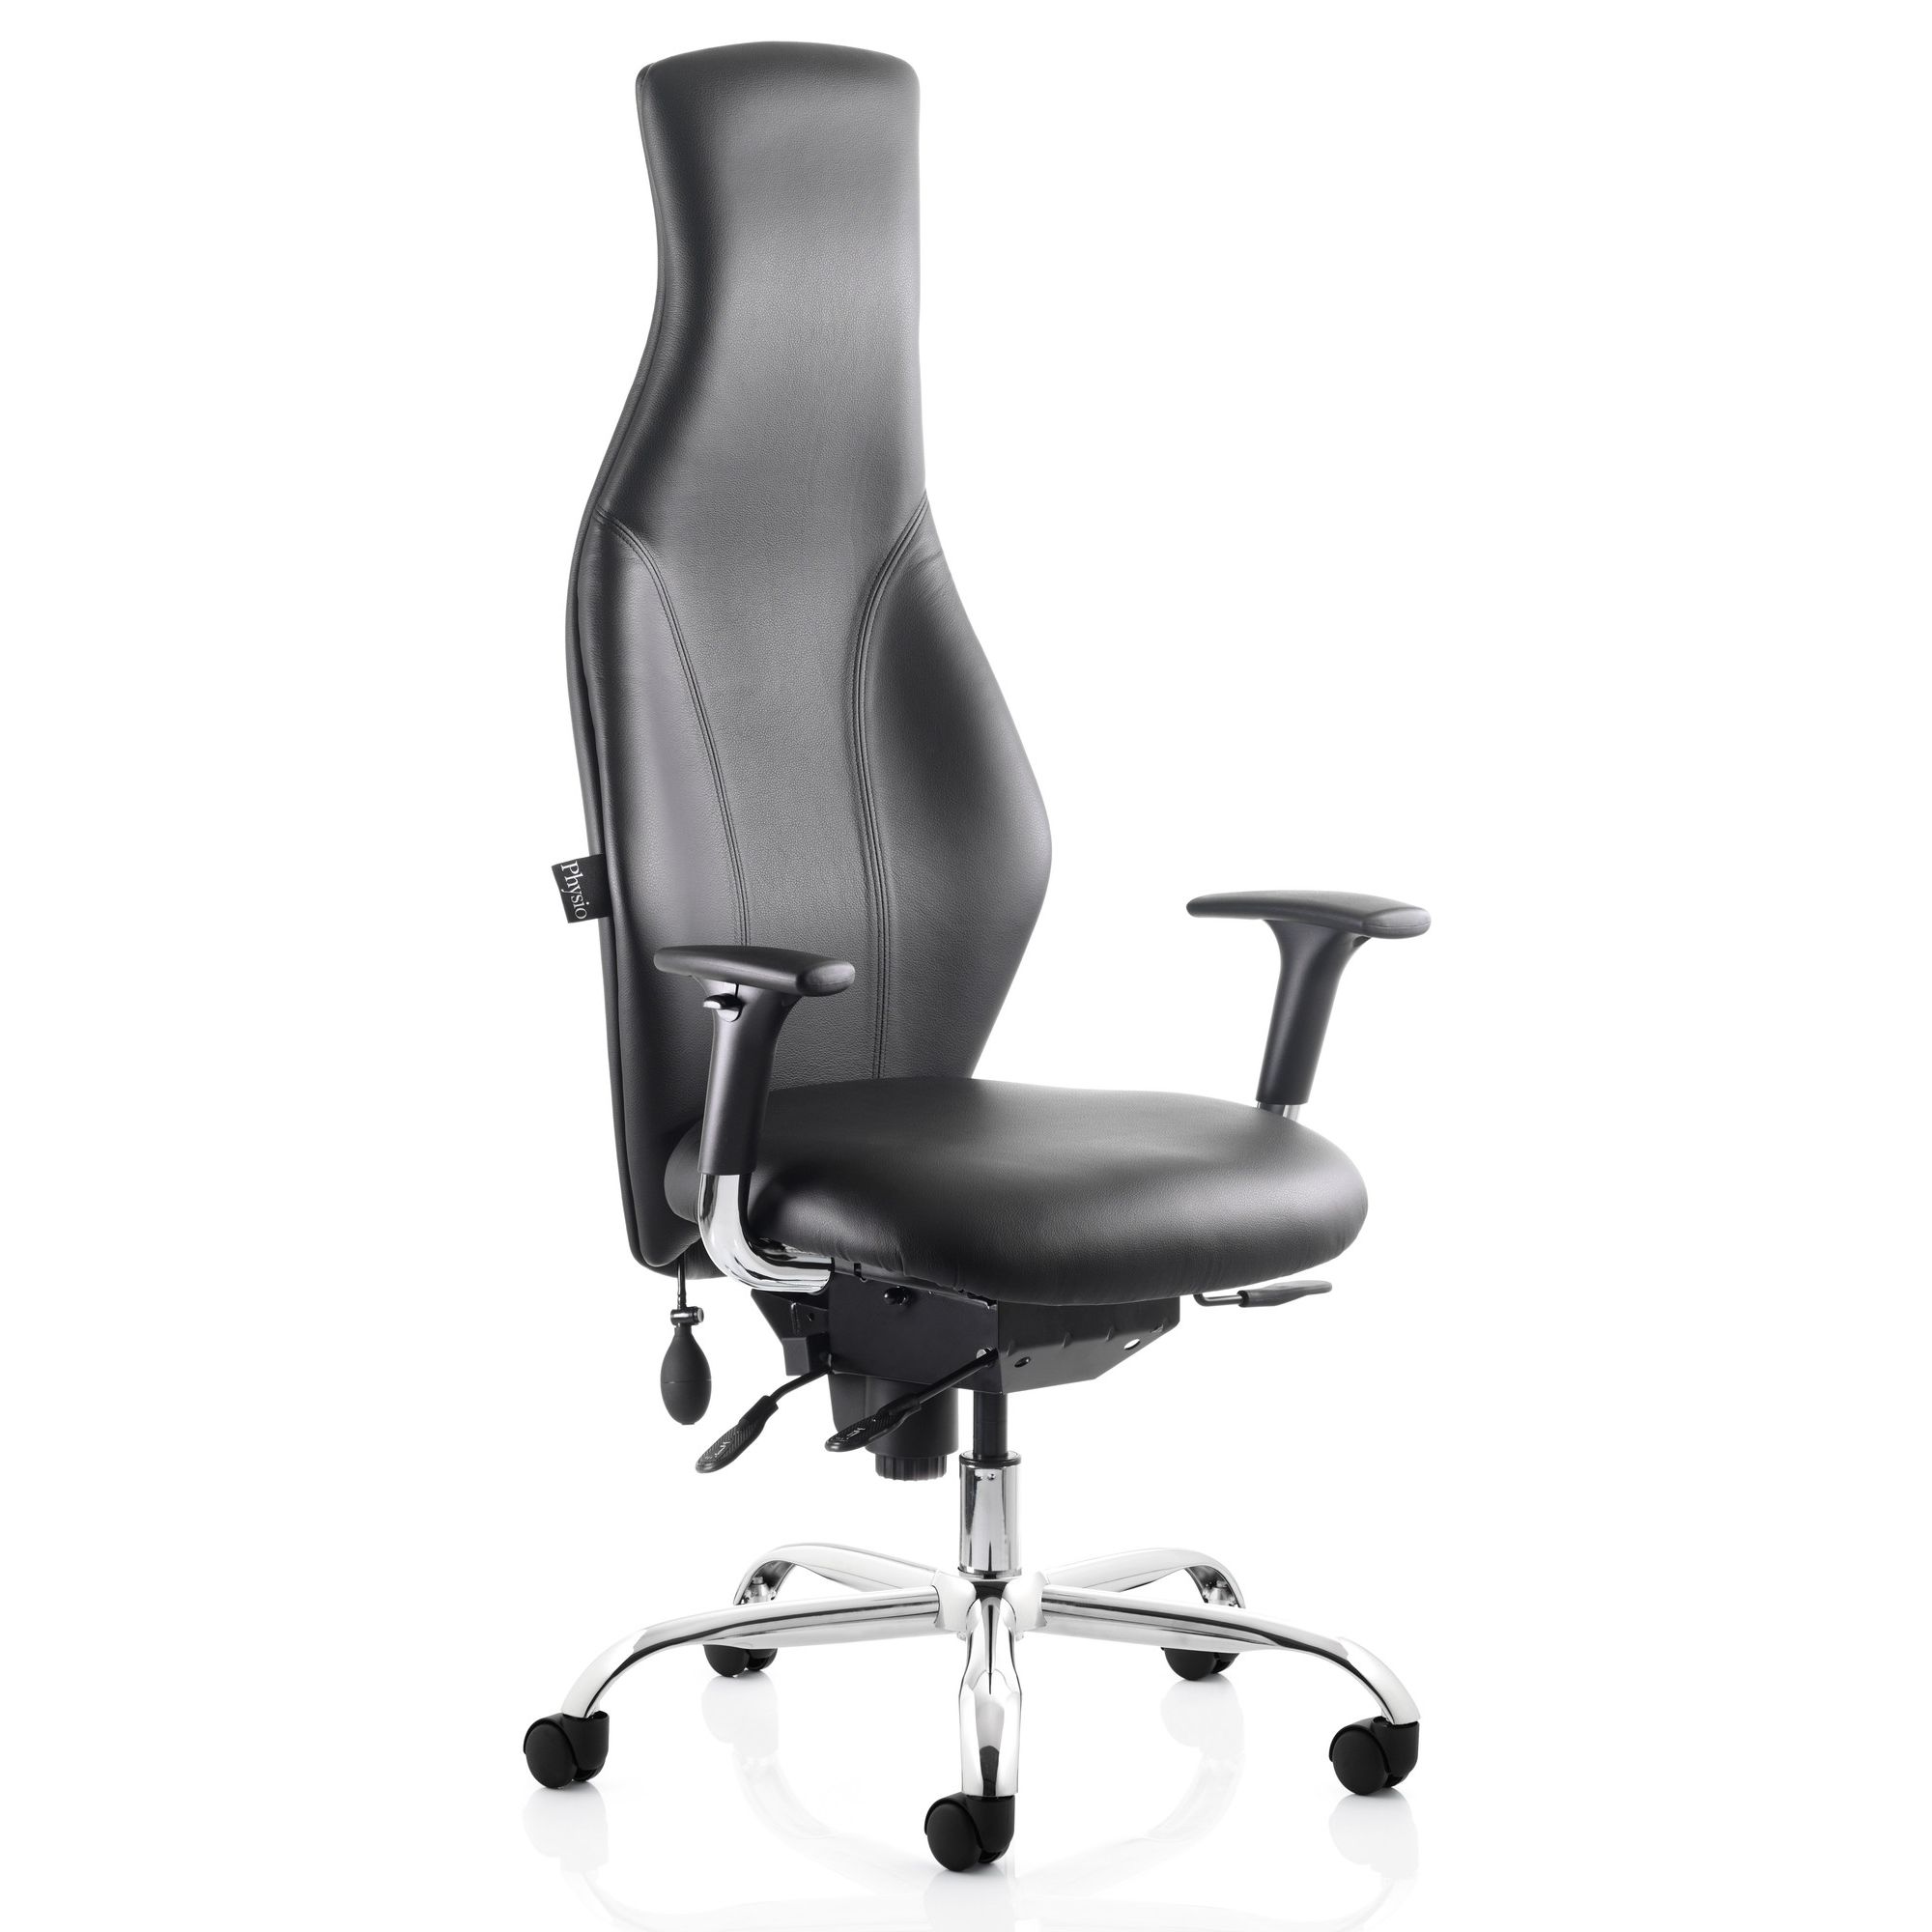 Ocee Design Physio High Back Task Chair at Tescos Direct